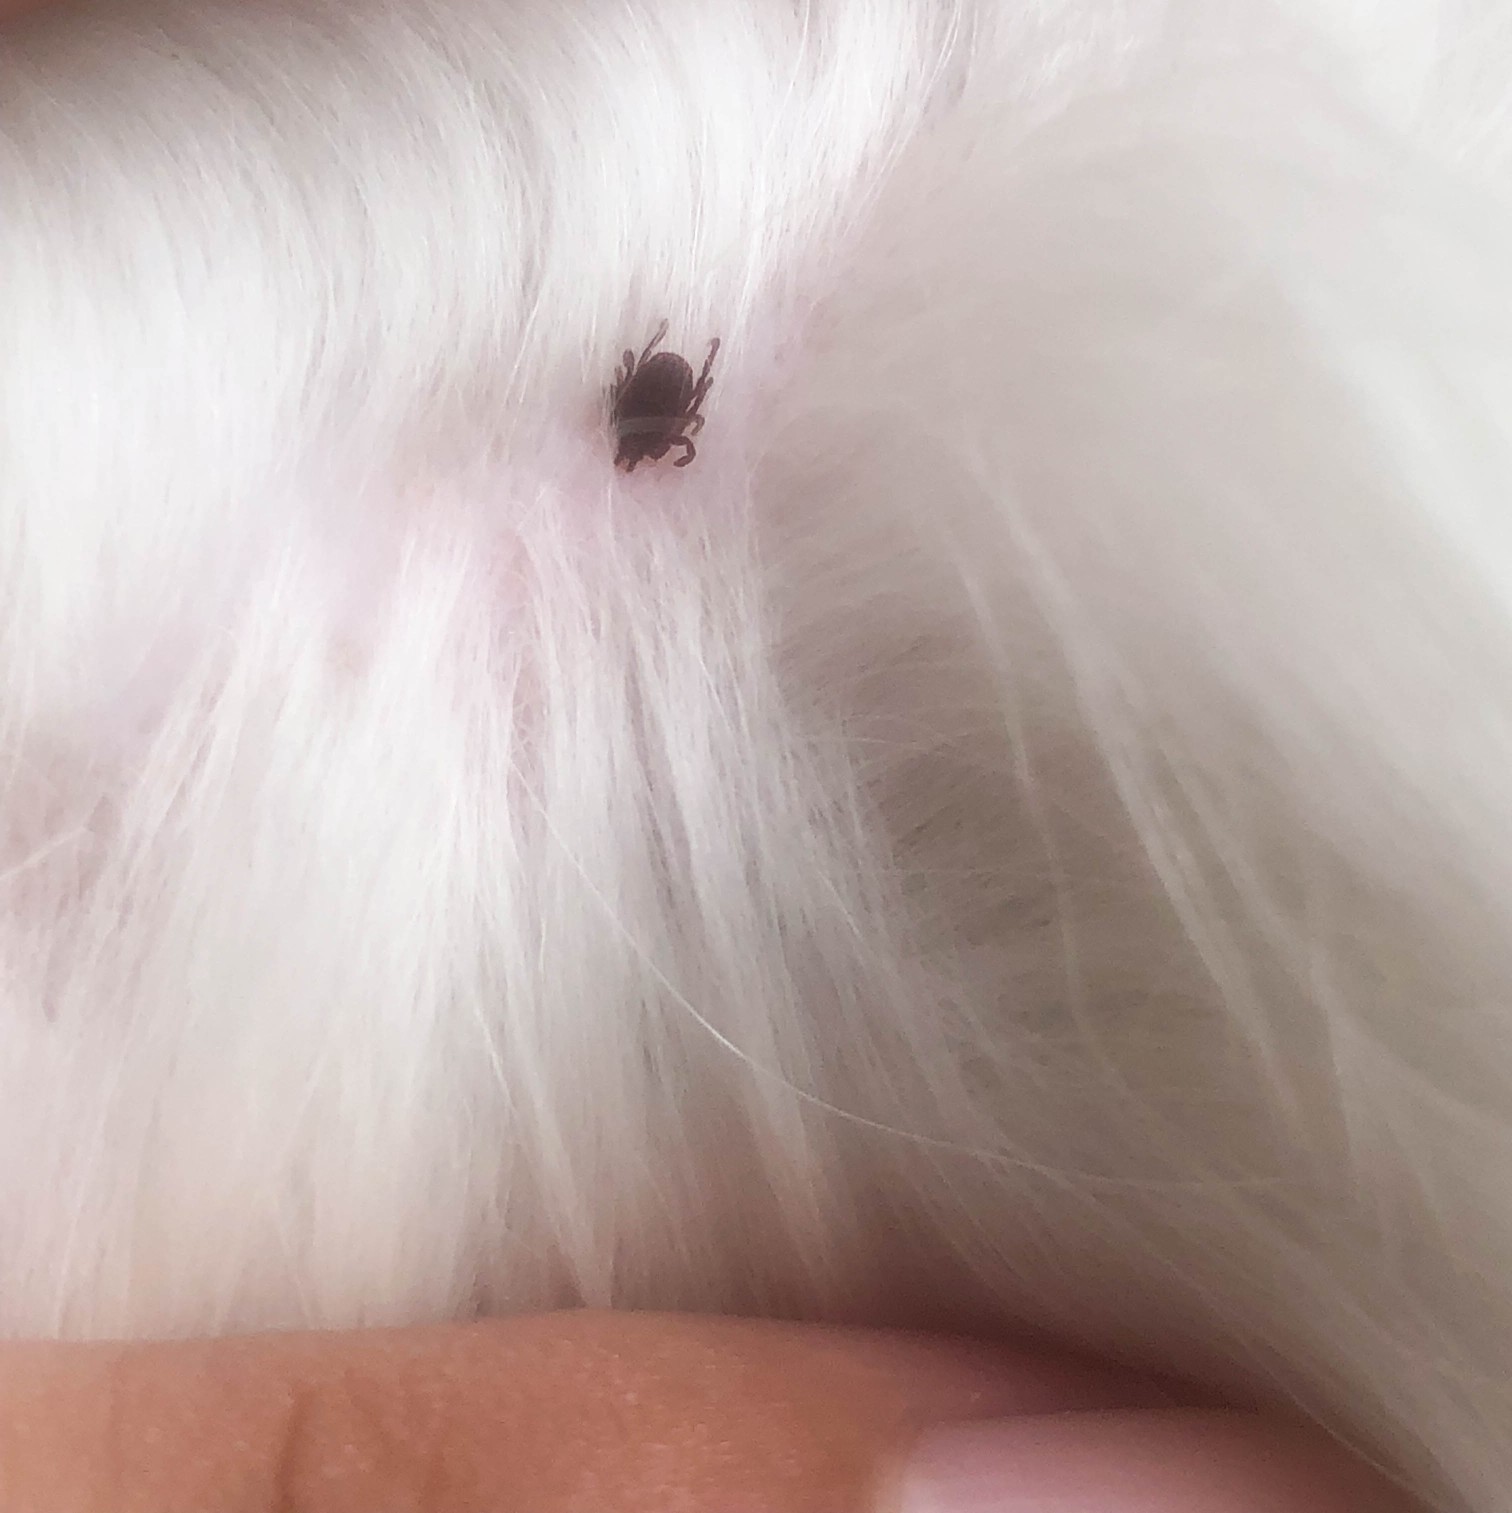 a dog tick is eating blood on a dog fur